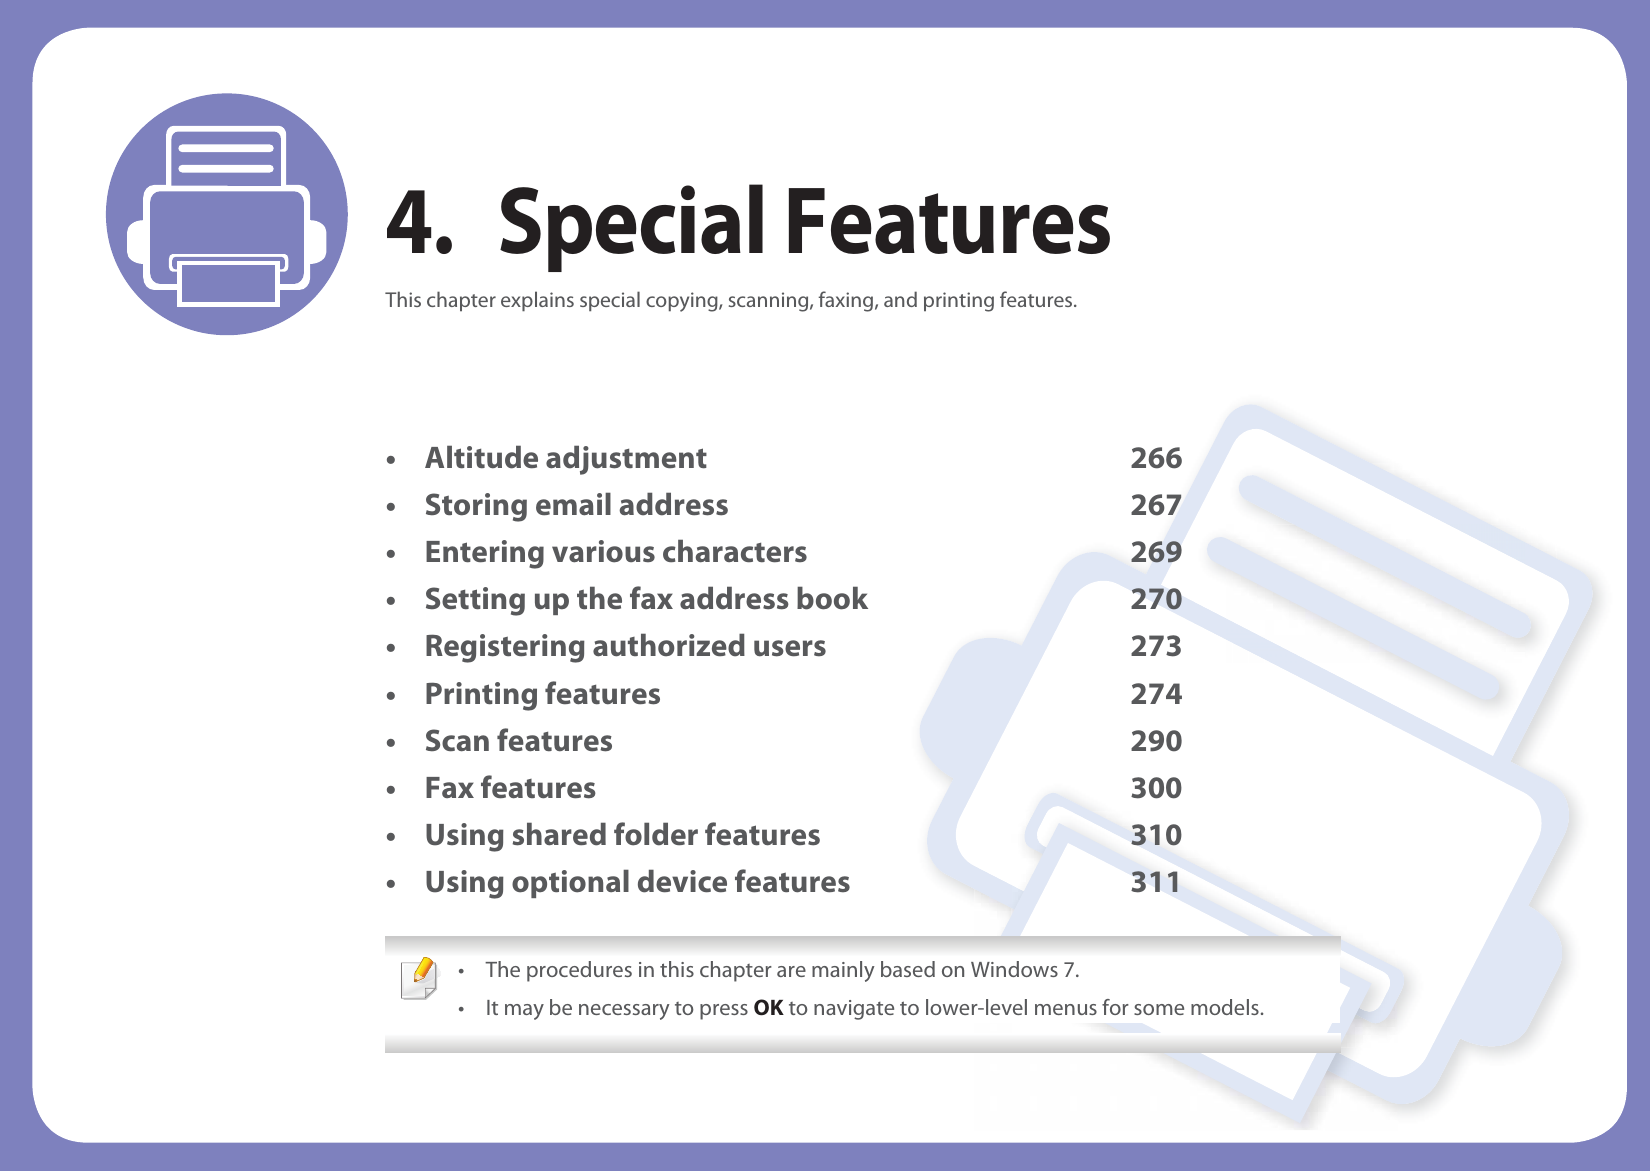 4. Special FeaturesThis chapter explains special copying, scanning, faxing, and printing features.• Altitude adjustment 266• Storing email address 267• Entering various characters 269• Setting up the fax address book 270• Registering authorized users 273• Printing features 274• Scan features 290• Fax features 300• Using shared folder features 310• Using optional device features 311 • The procedures in this chapter are mainly based on Windows 7.• It may be necessary to press OK to navigate to lower-level menus for some models. 